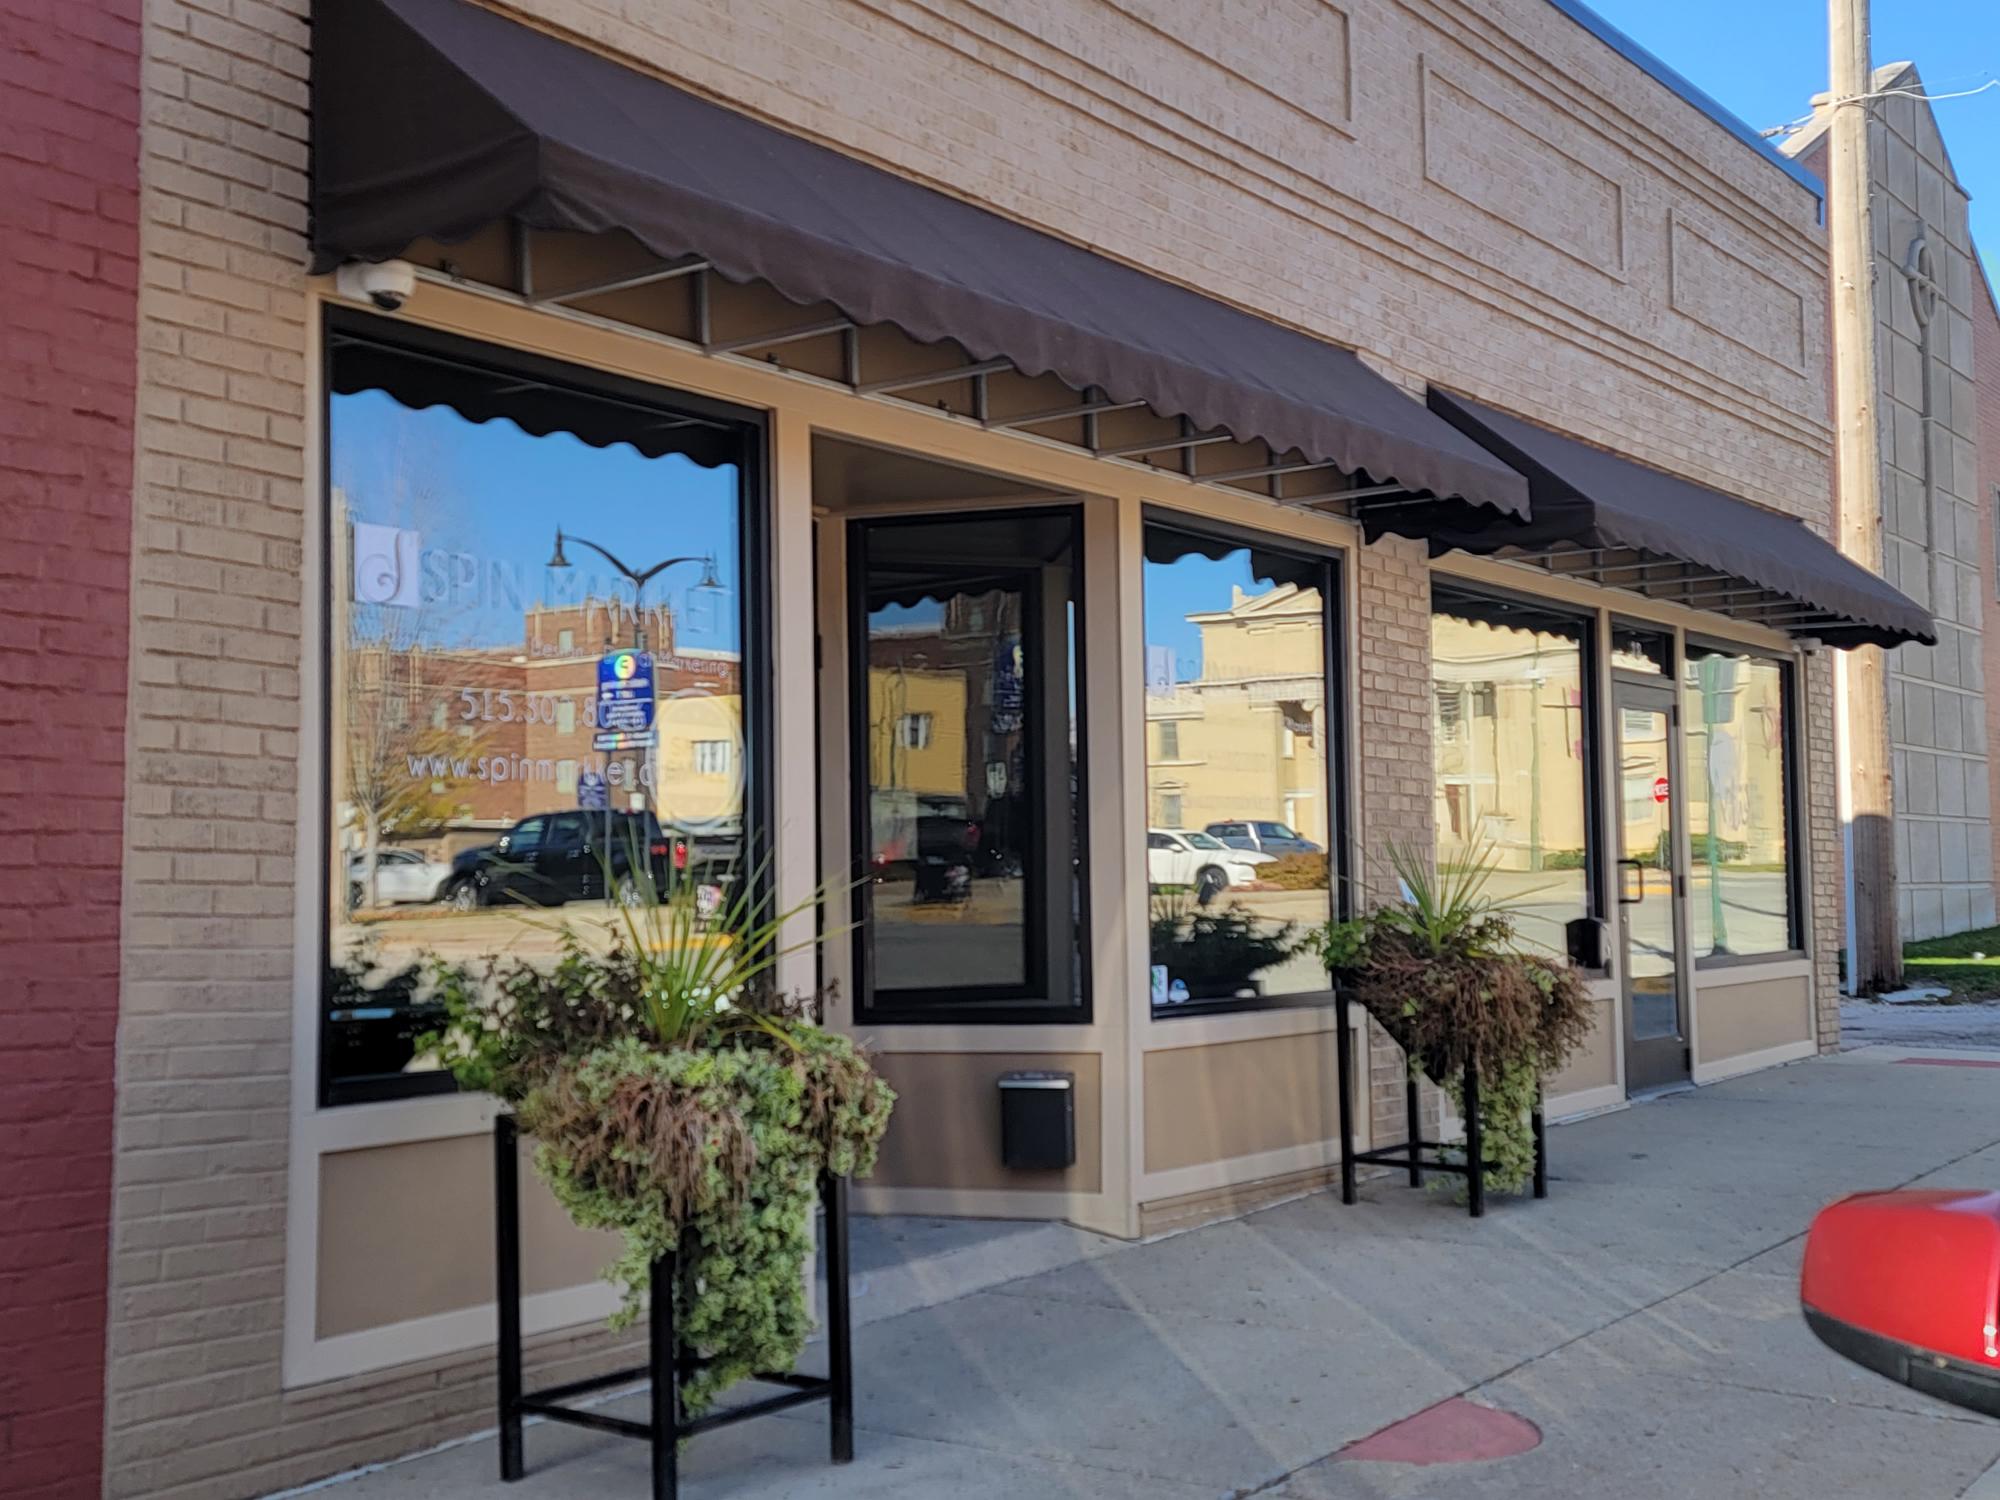 Spin Markket + Digital Store Front in Historic Downtown Fort Dodge